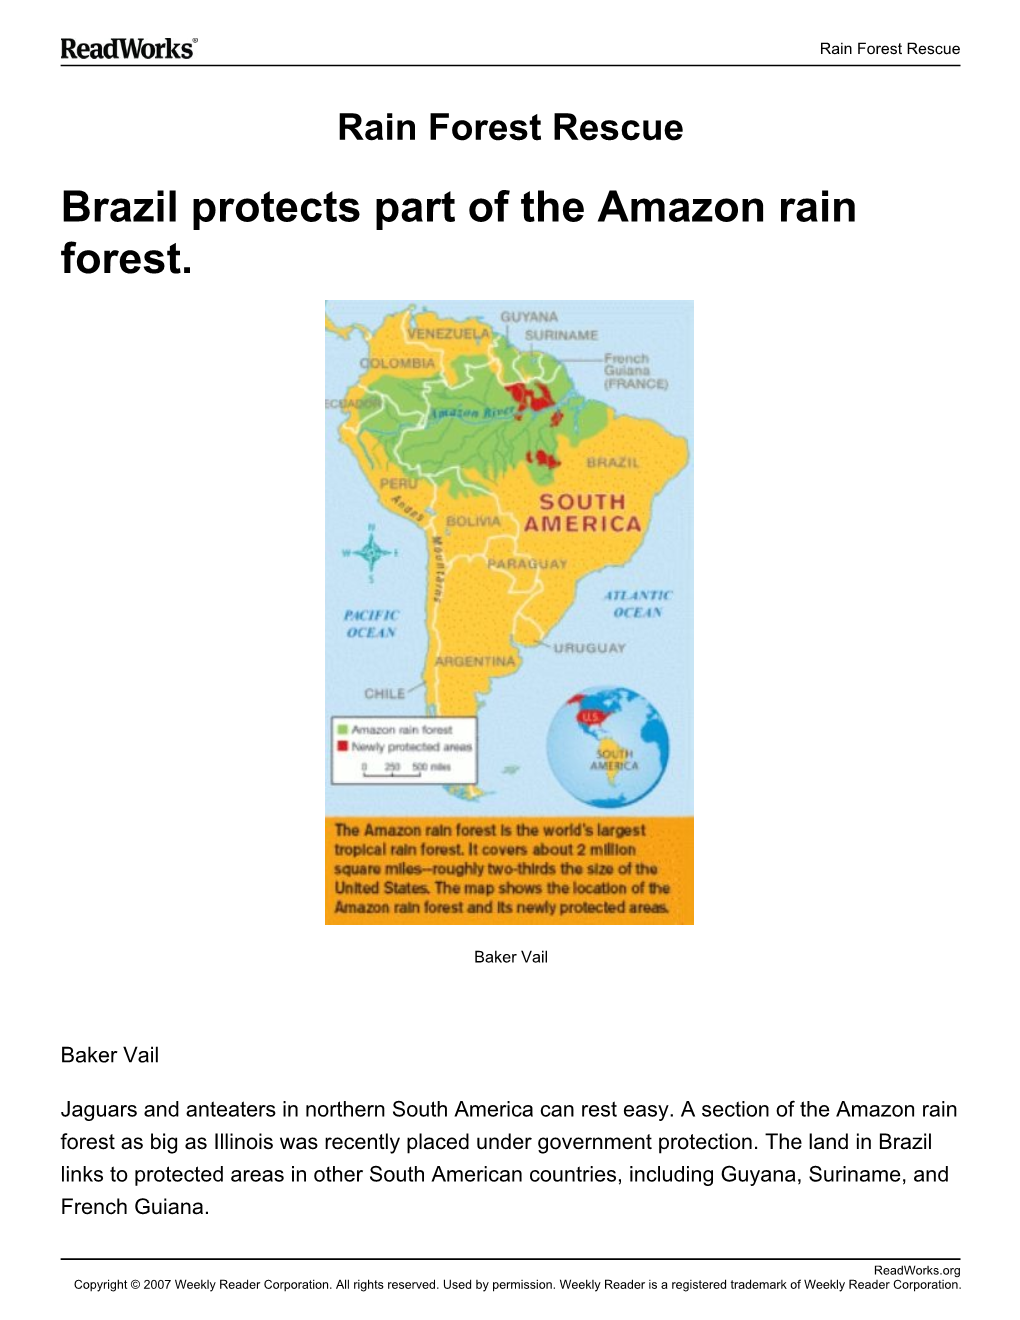 Brazil Protects Part of the Amazon Rain Forest